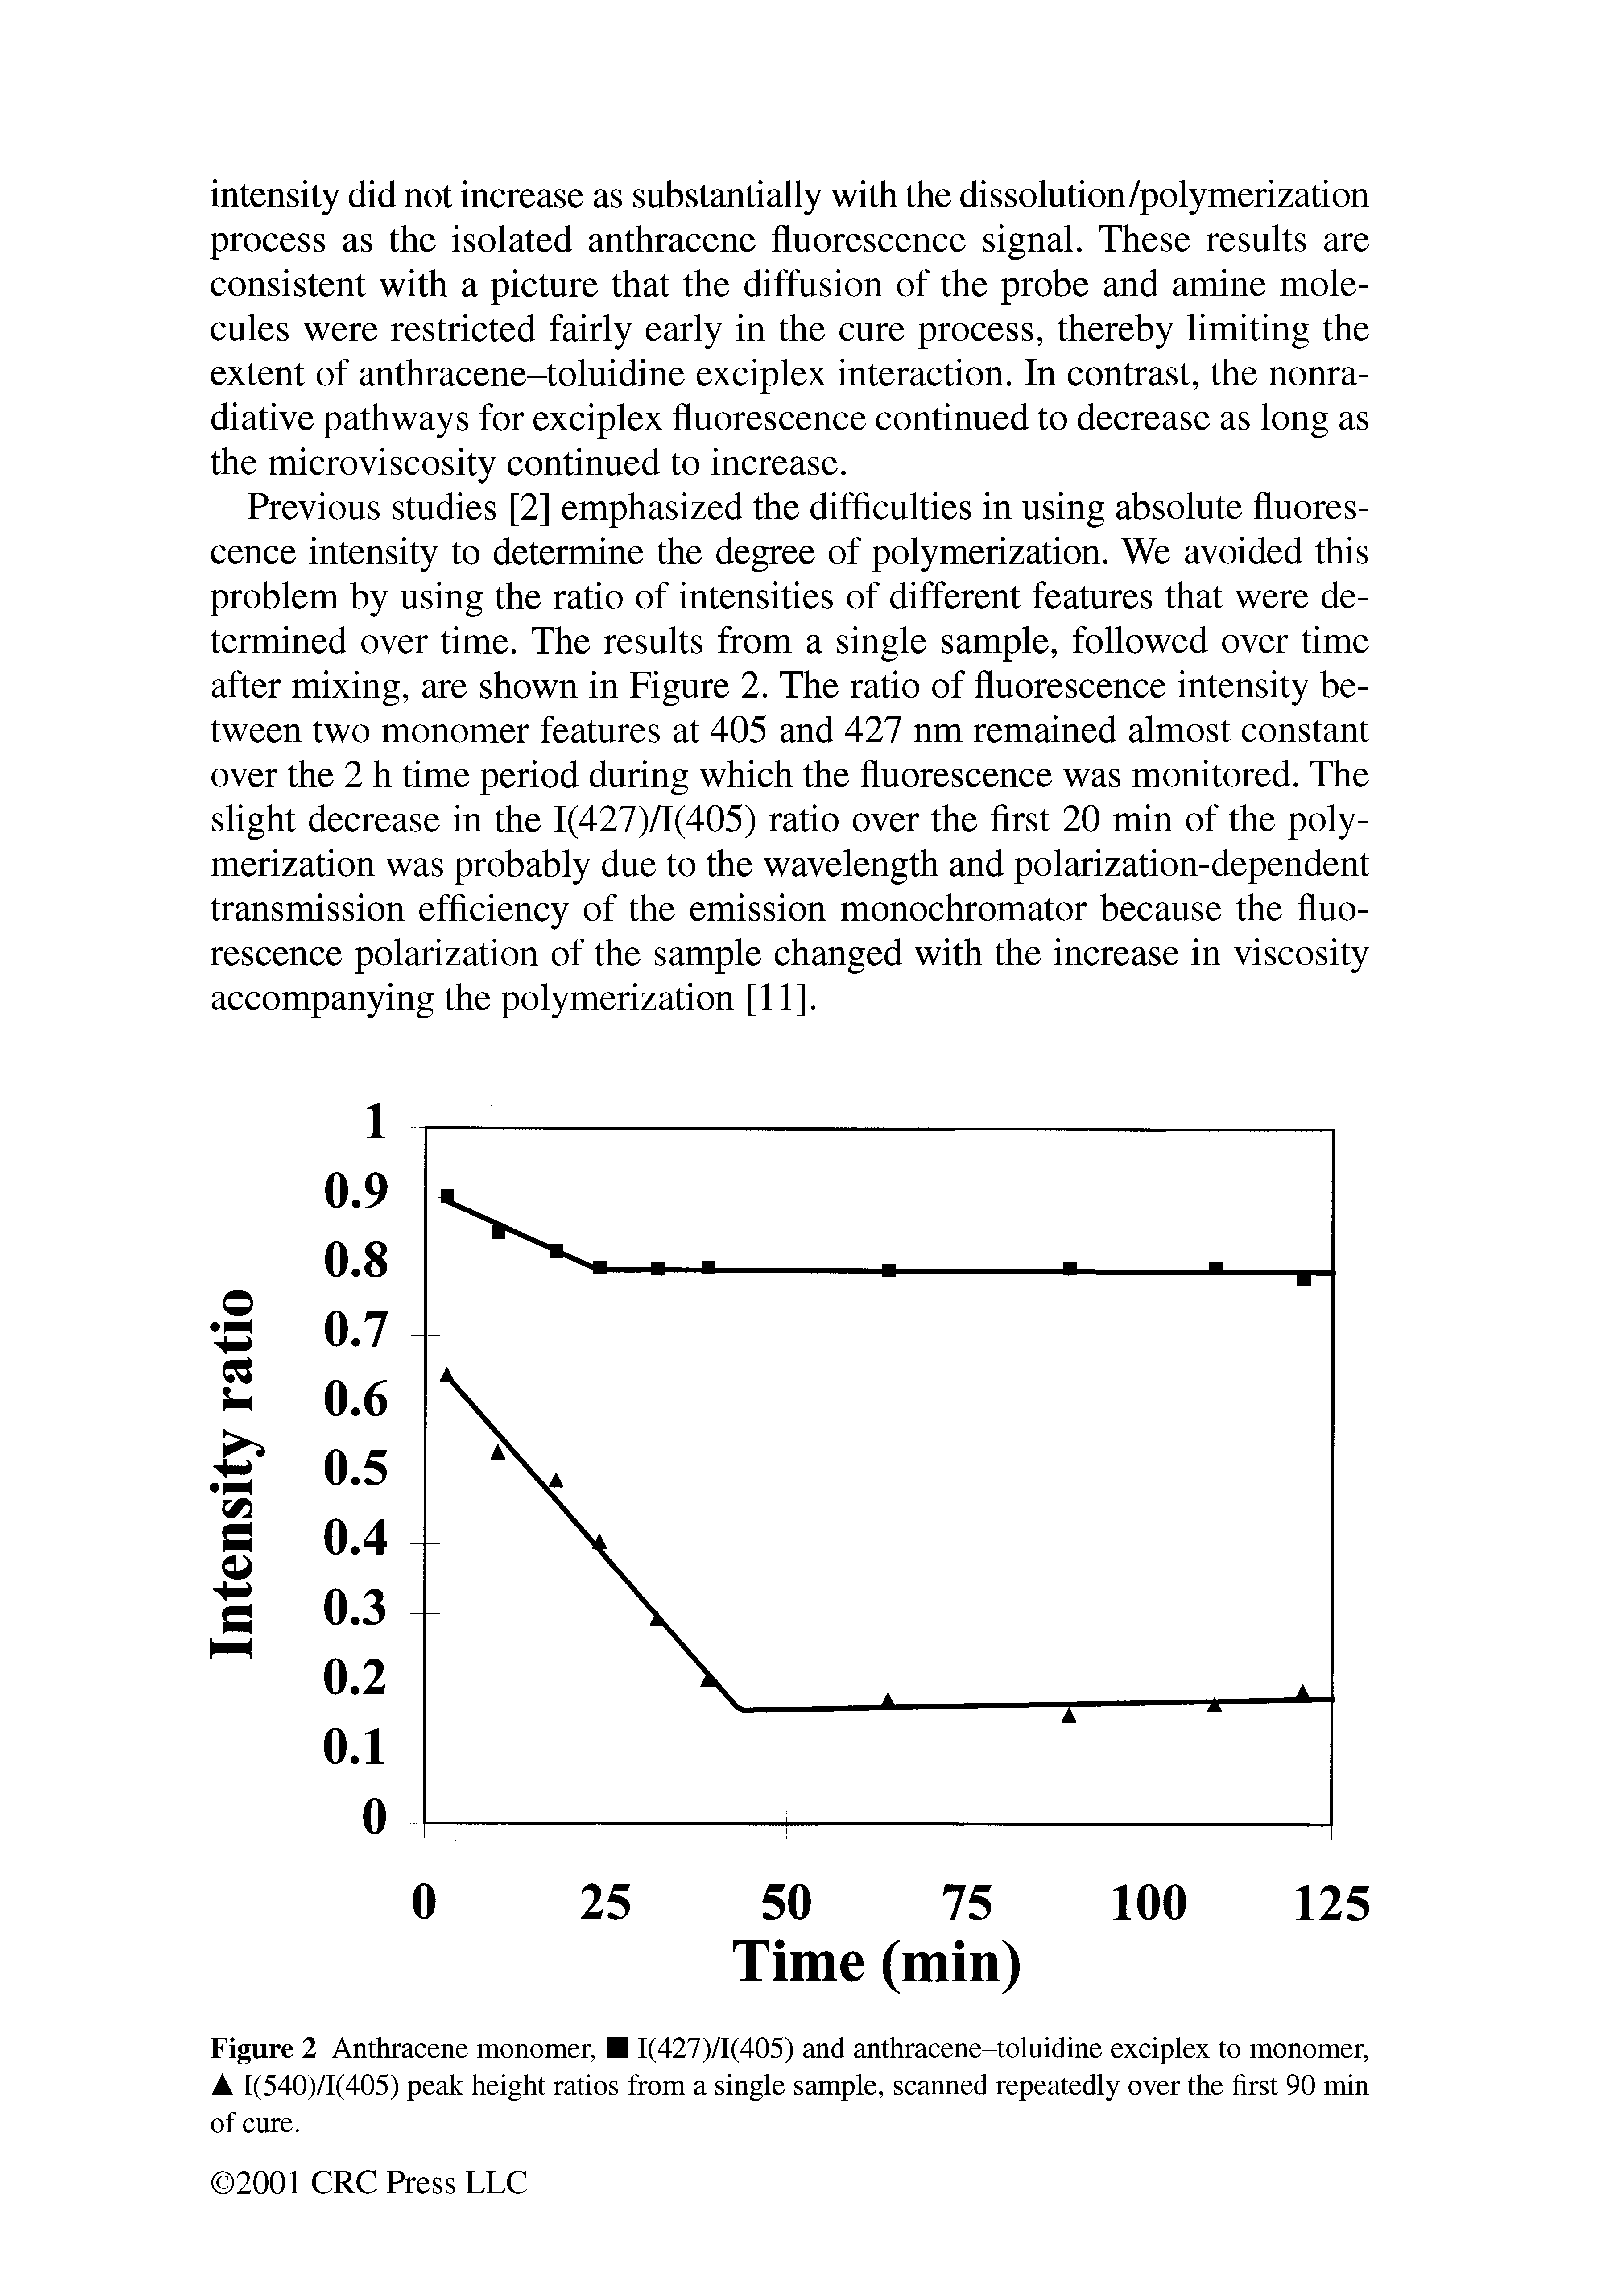 Figure 2 Anthracene monomer, 1(427)71(405) and anthraeene-toluidine exciplex to monomer, 1(540)71(405) peak height ratios from a single sample, scanned repeatedly over the first 90 min of cure.